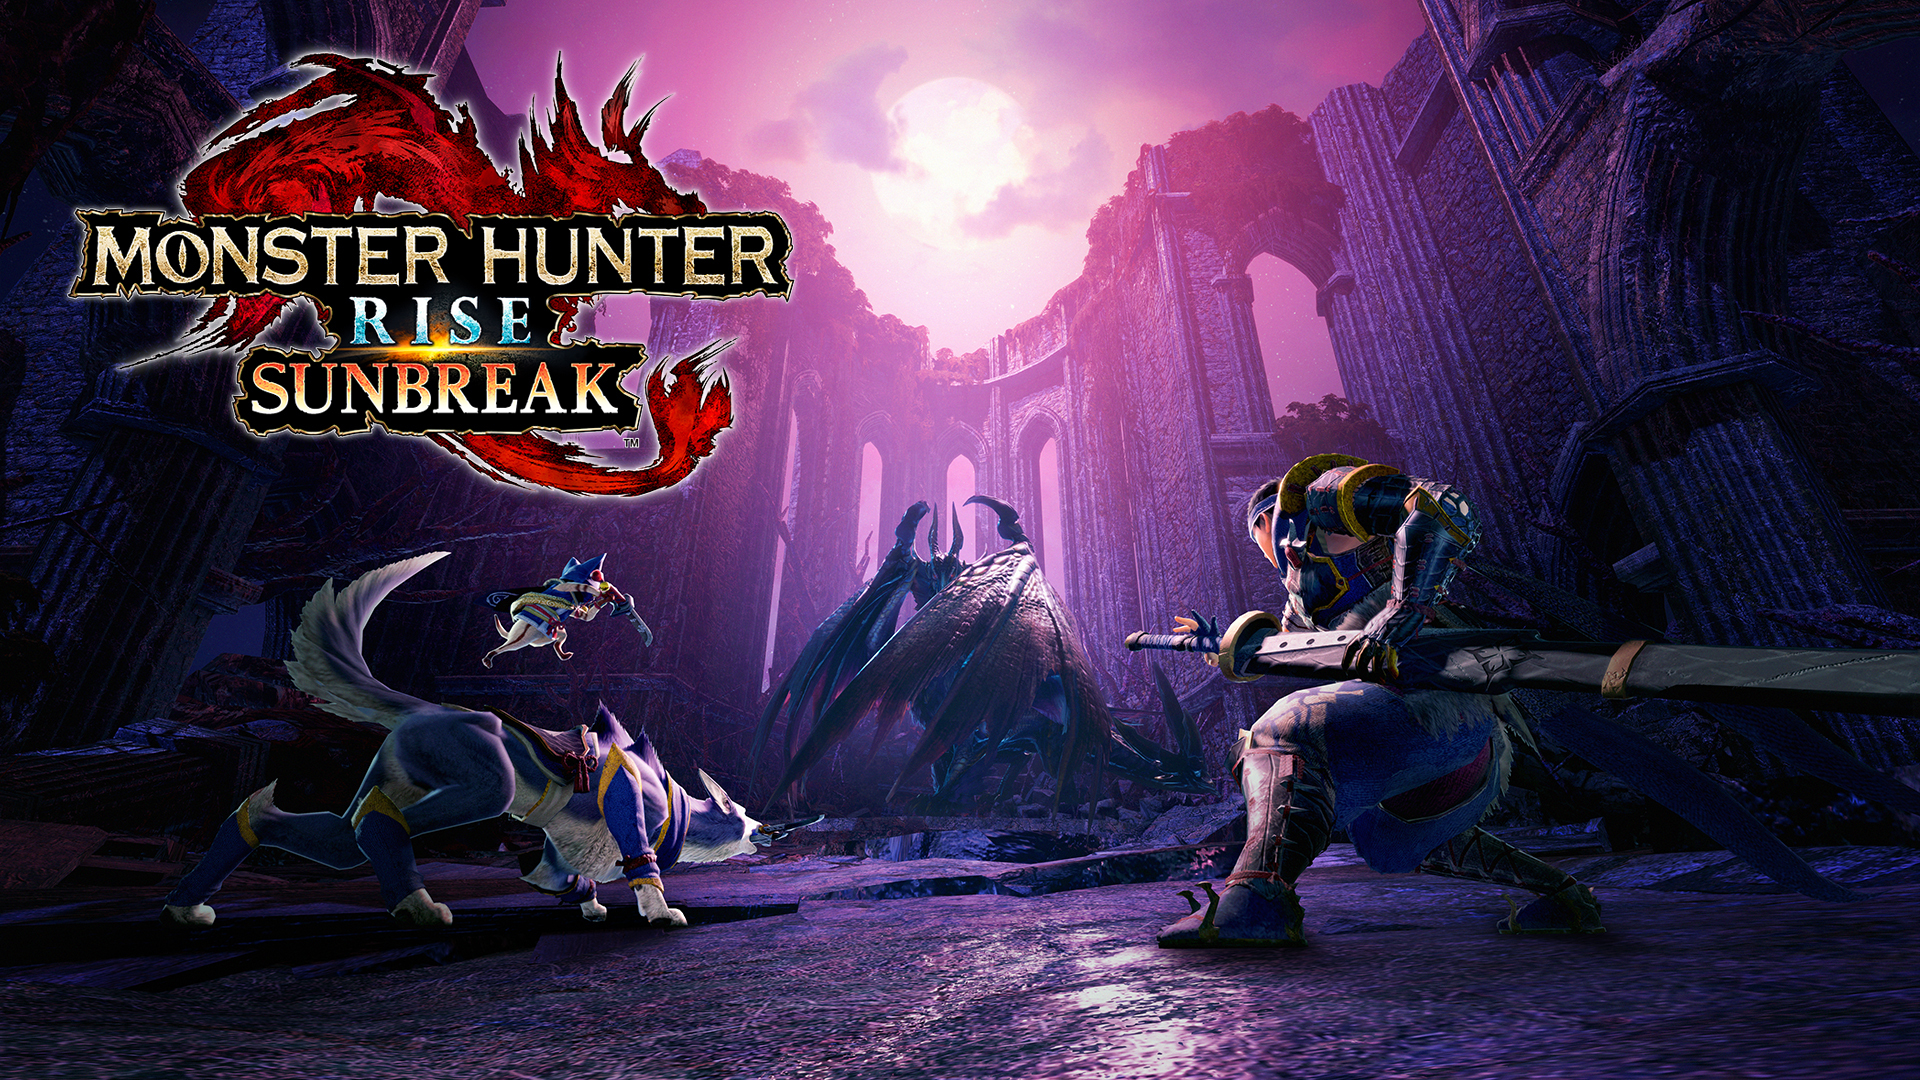 First Impressions: Monster Hunter Rise on PC enhances an already